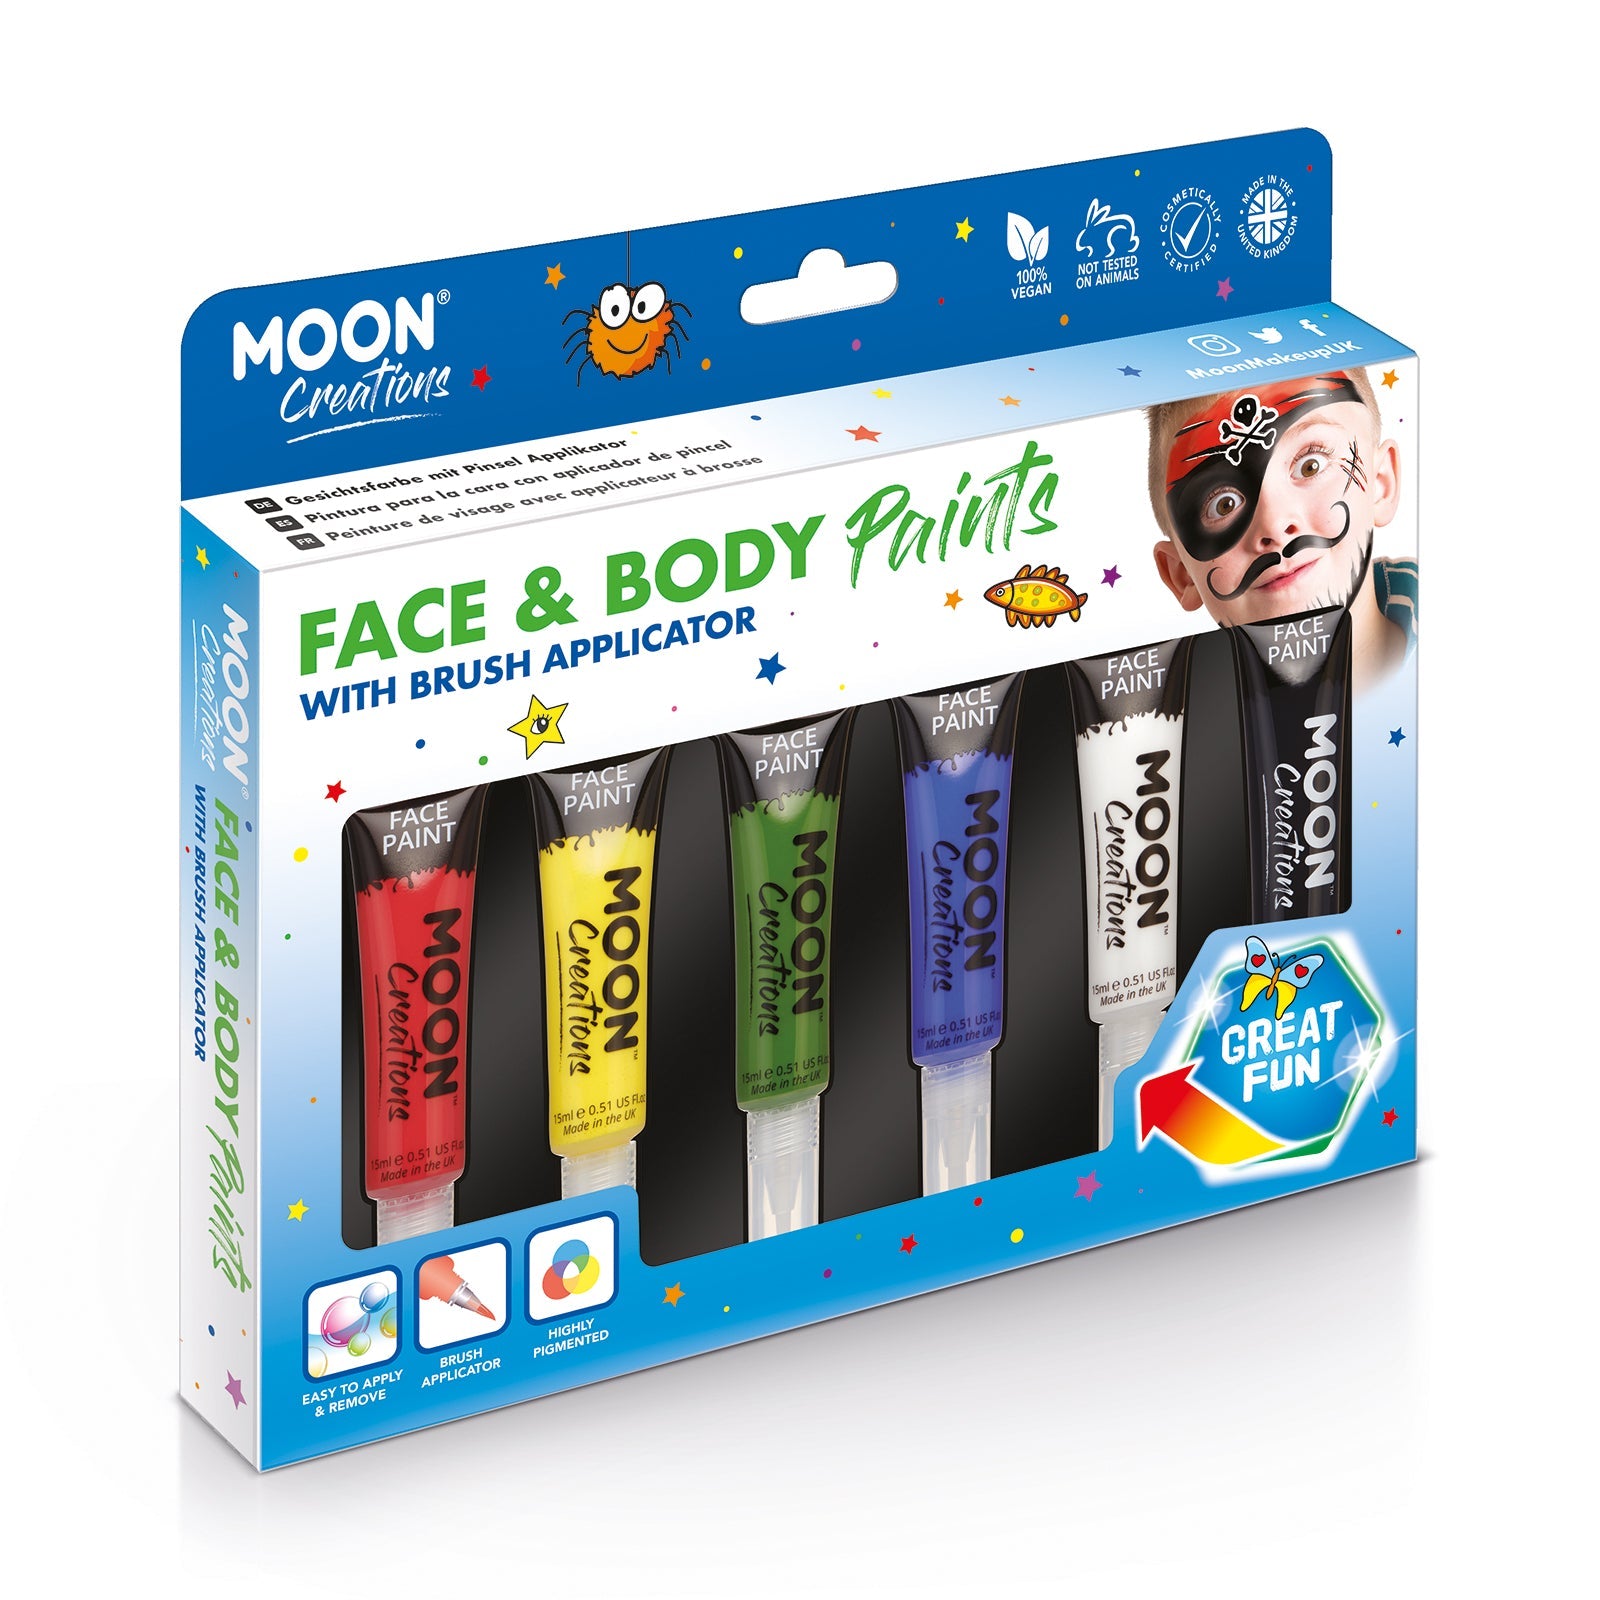 Face & Body Paint Makeup w/brush Primary Colours Boxset - 6 tubes, brush, spong. Cosmetically certified, FDA & Health Canada compliant, cruelty free and vegan.